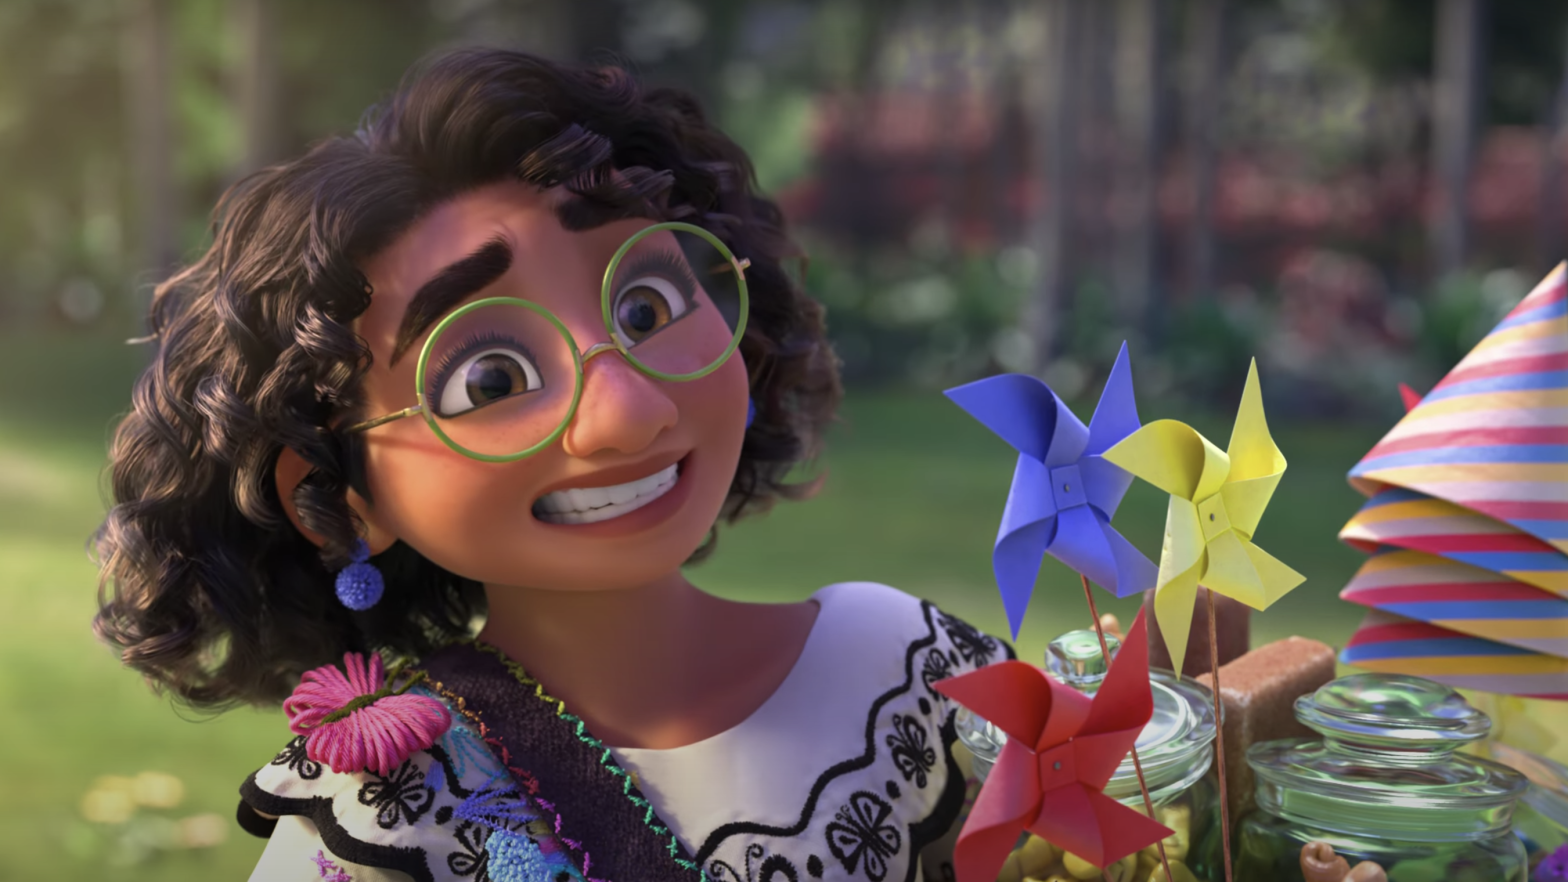 My face whenever someone tries to give me a plant for my birthday. You know that thing's gonna die. (Screenshot: Disney)